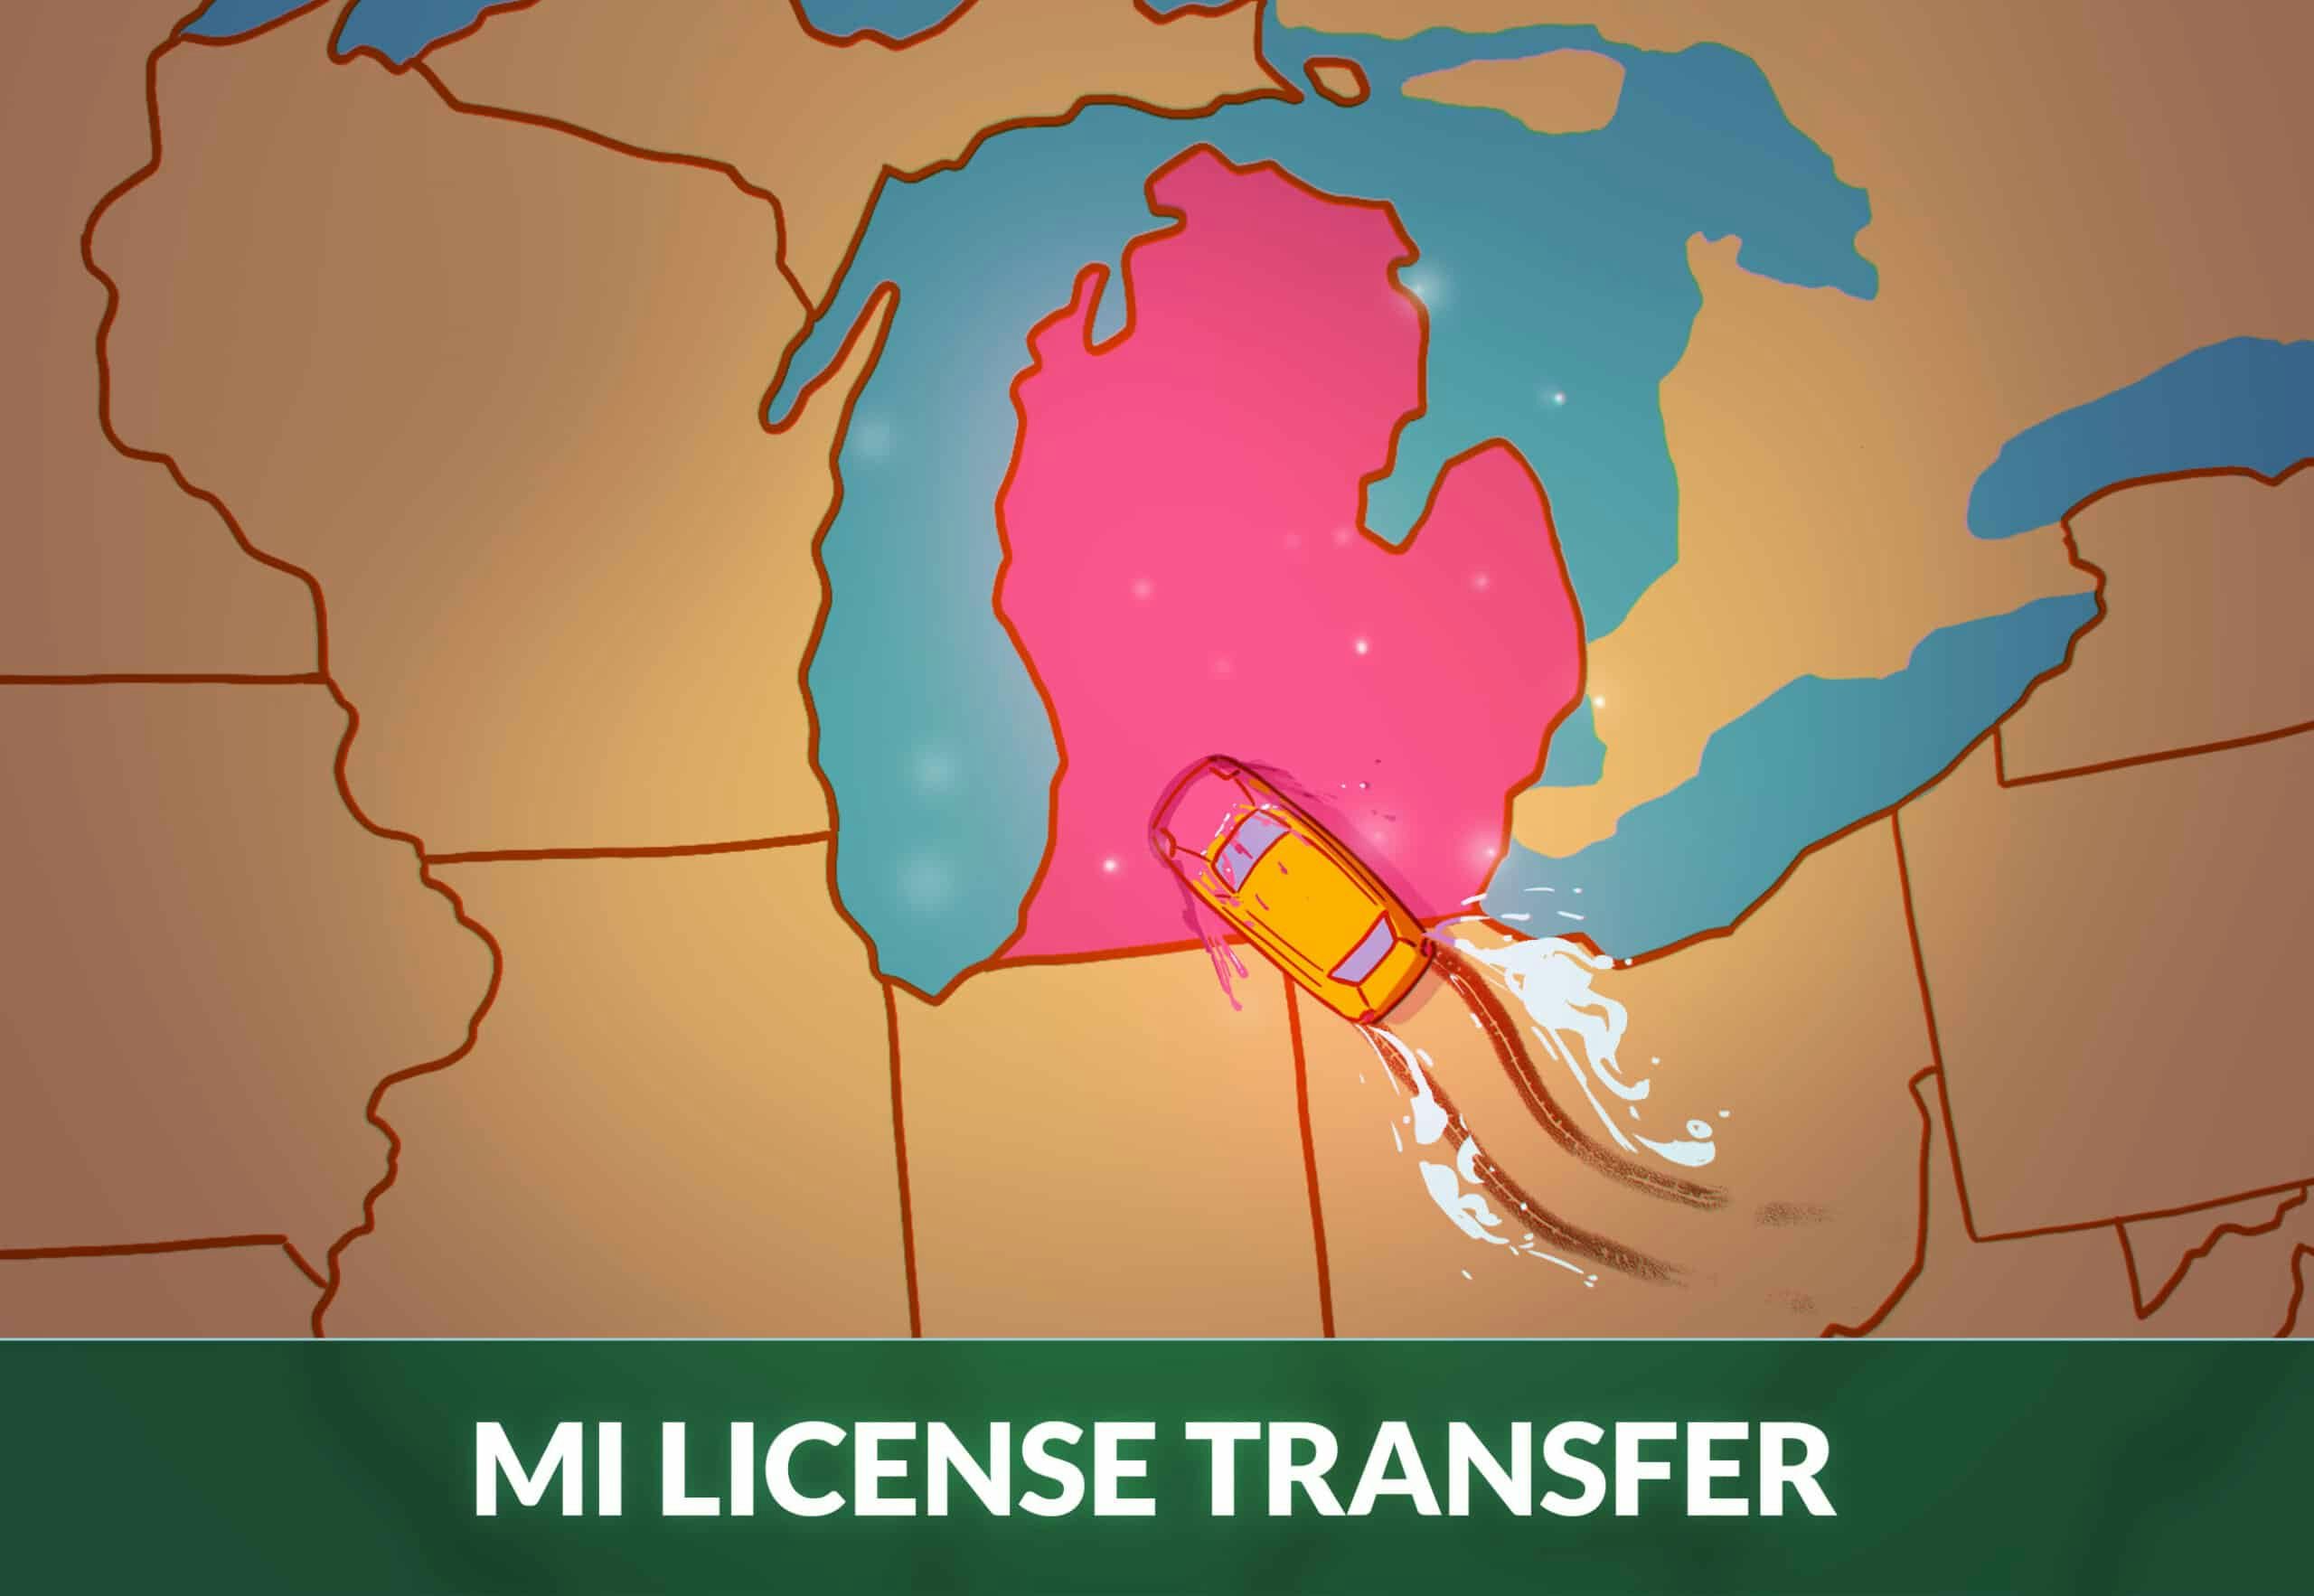 can you retake your driver's license picture in michigan